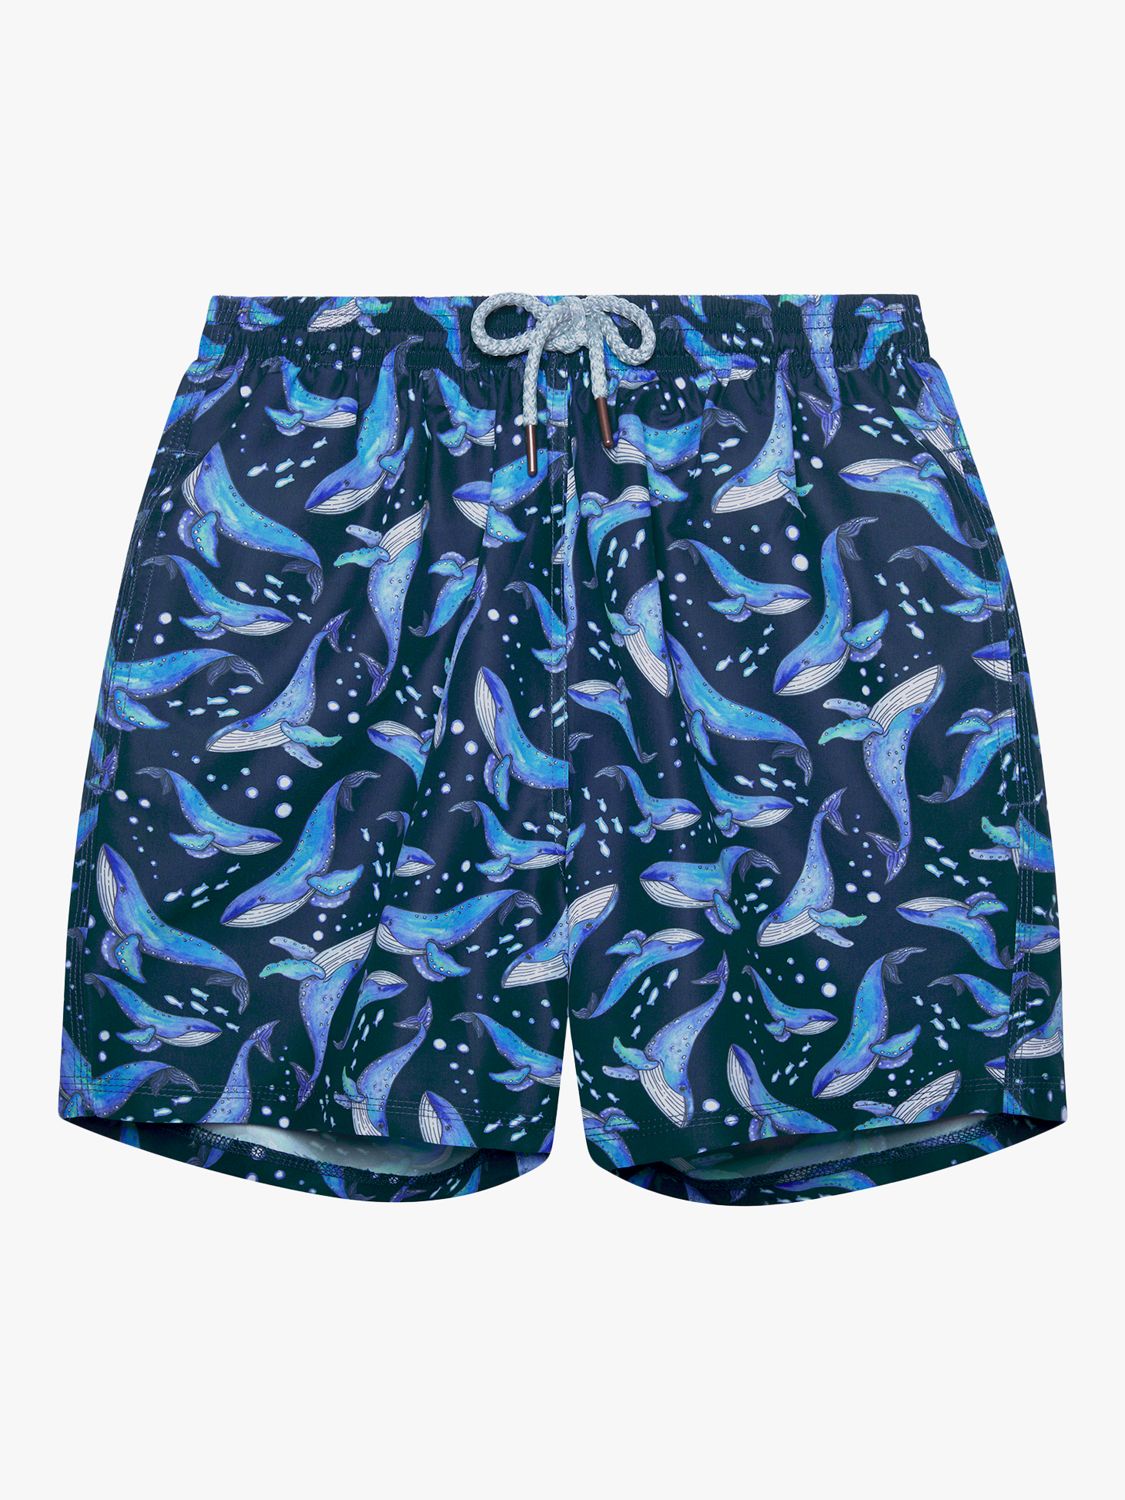 Buy Trotters Whale Swim Shorts, Navy/Whale Online at johnlewis.com